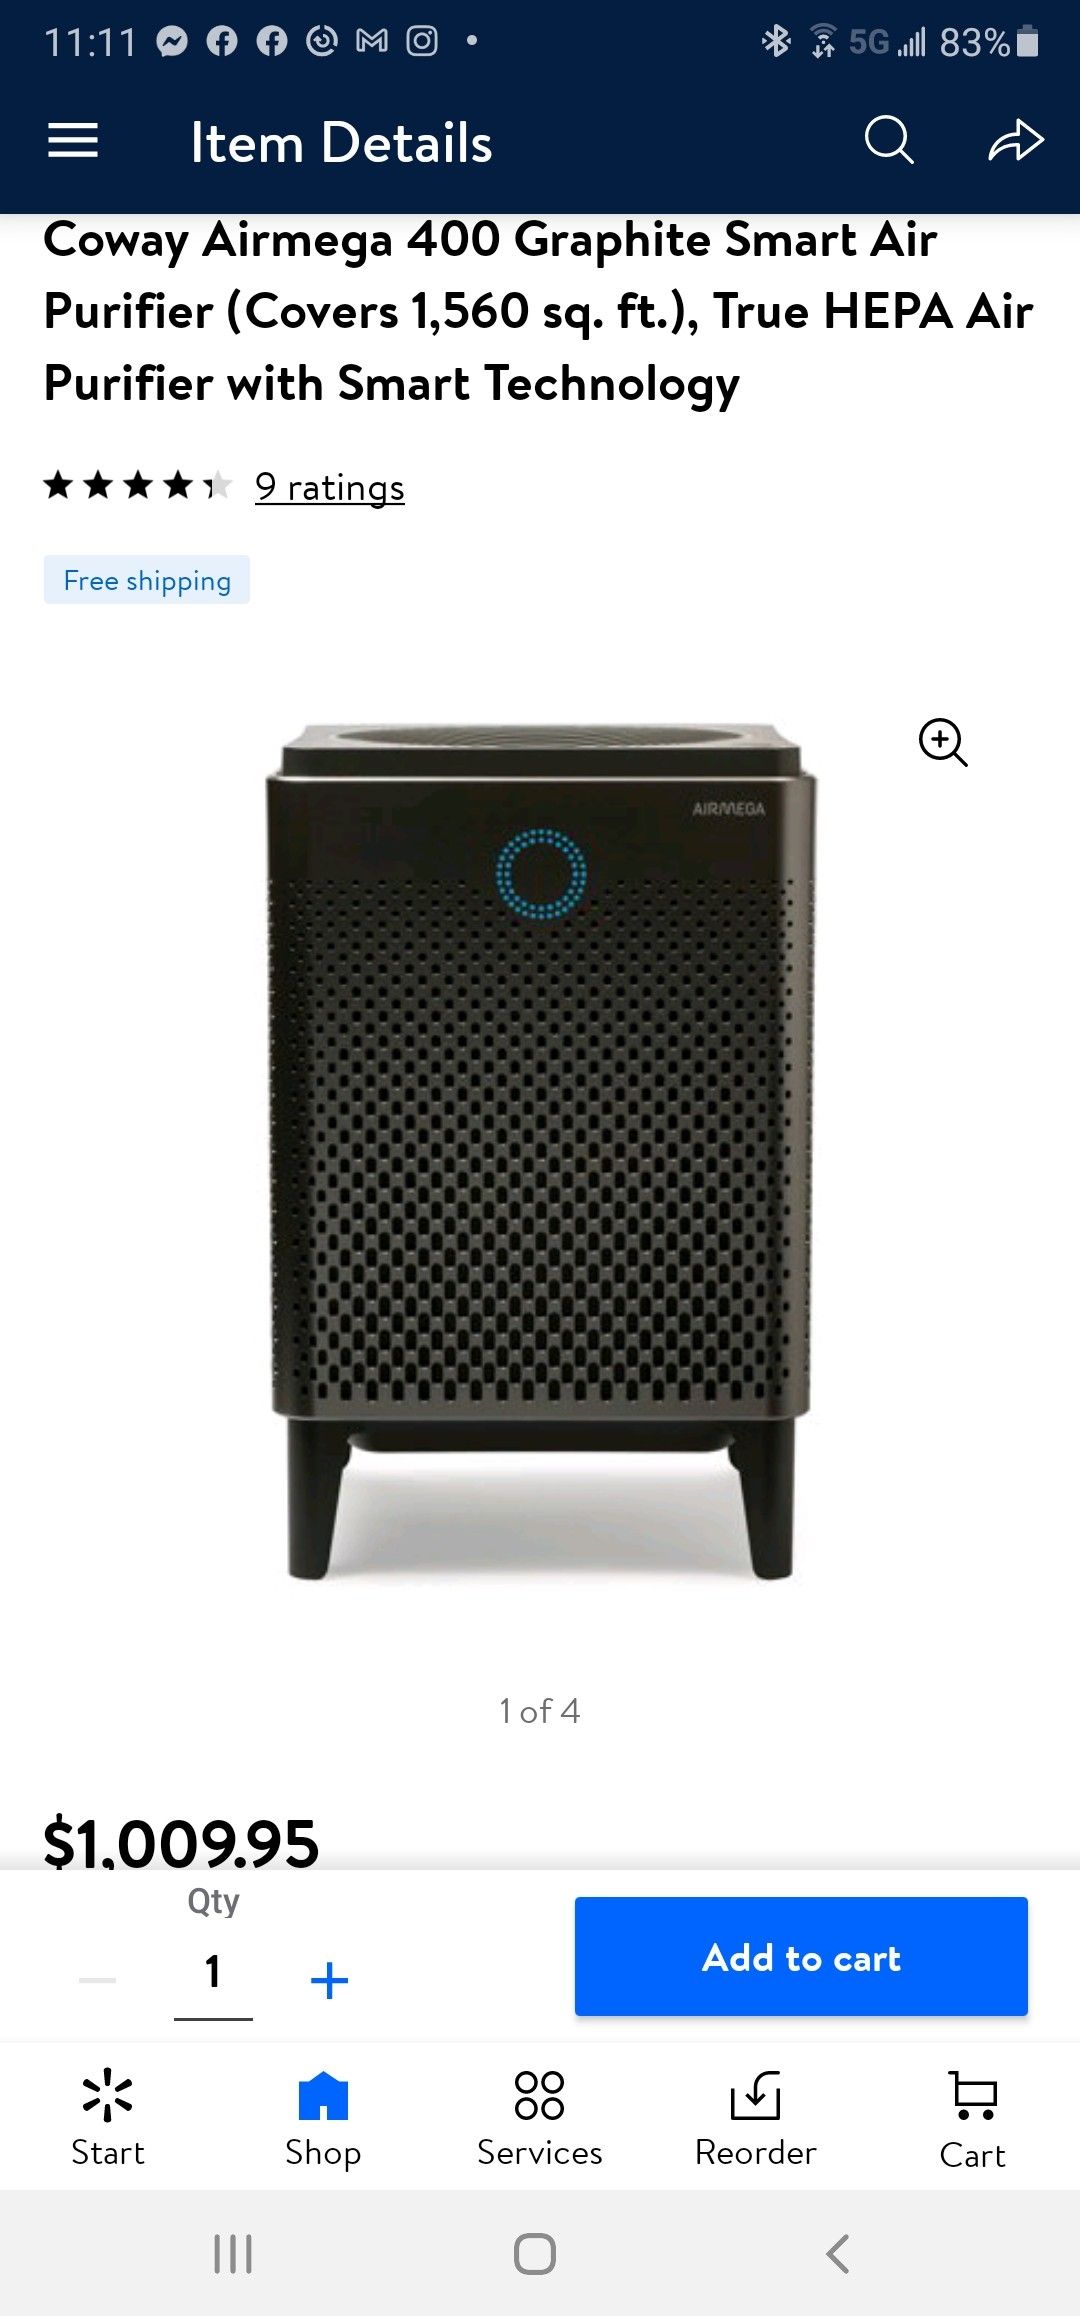 Coway Airmega 400 Graphite Smart Air Purifier (Covers 1,560 sq. ft.), True HEPA Air Purifier with Smart Technology $500 FIRM